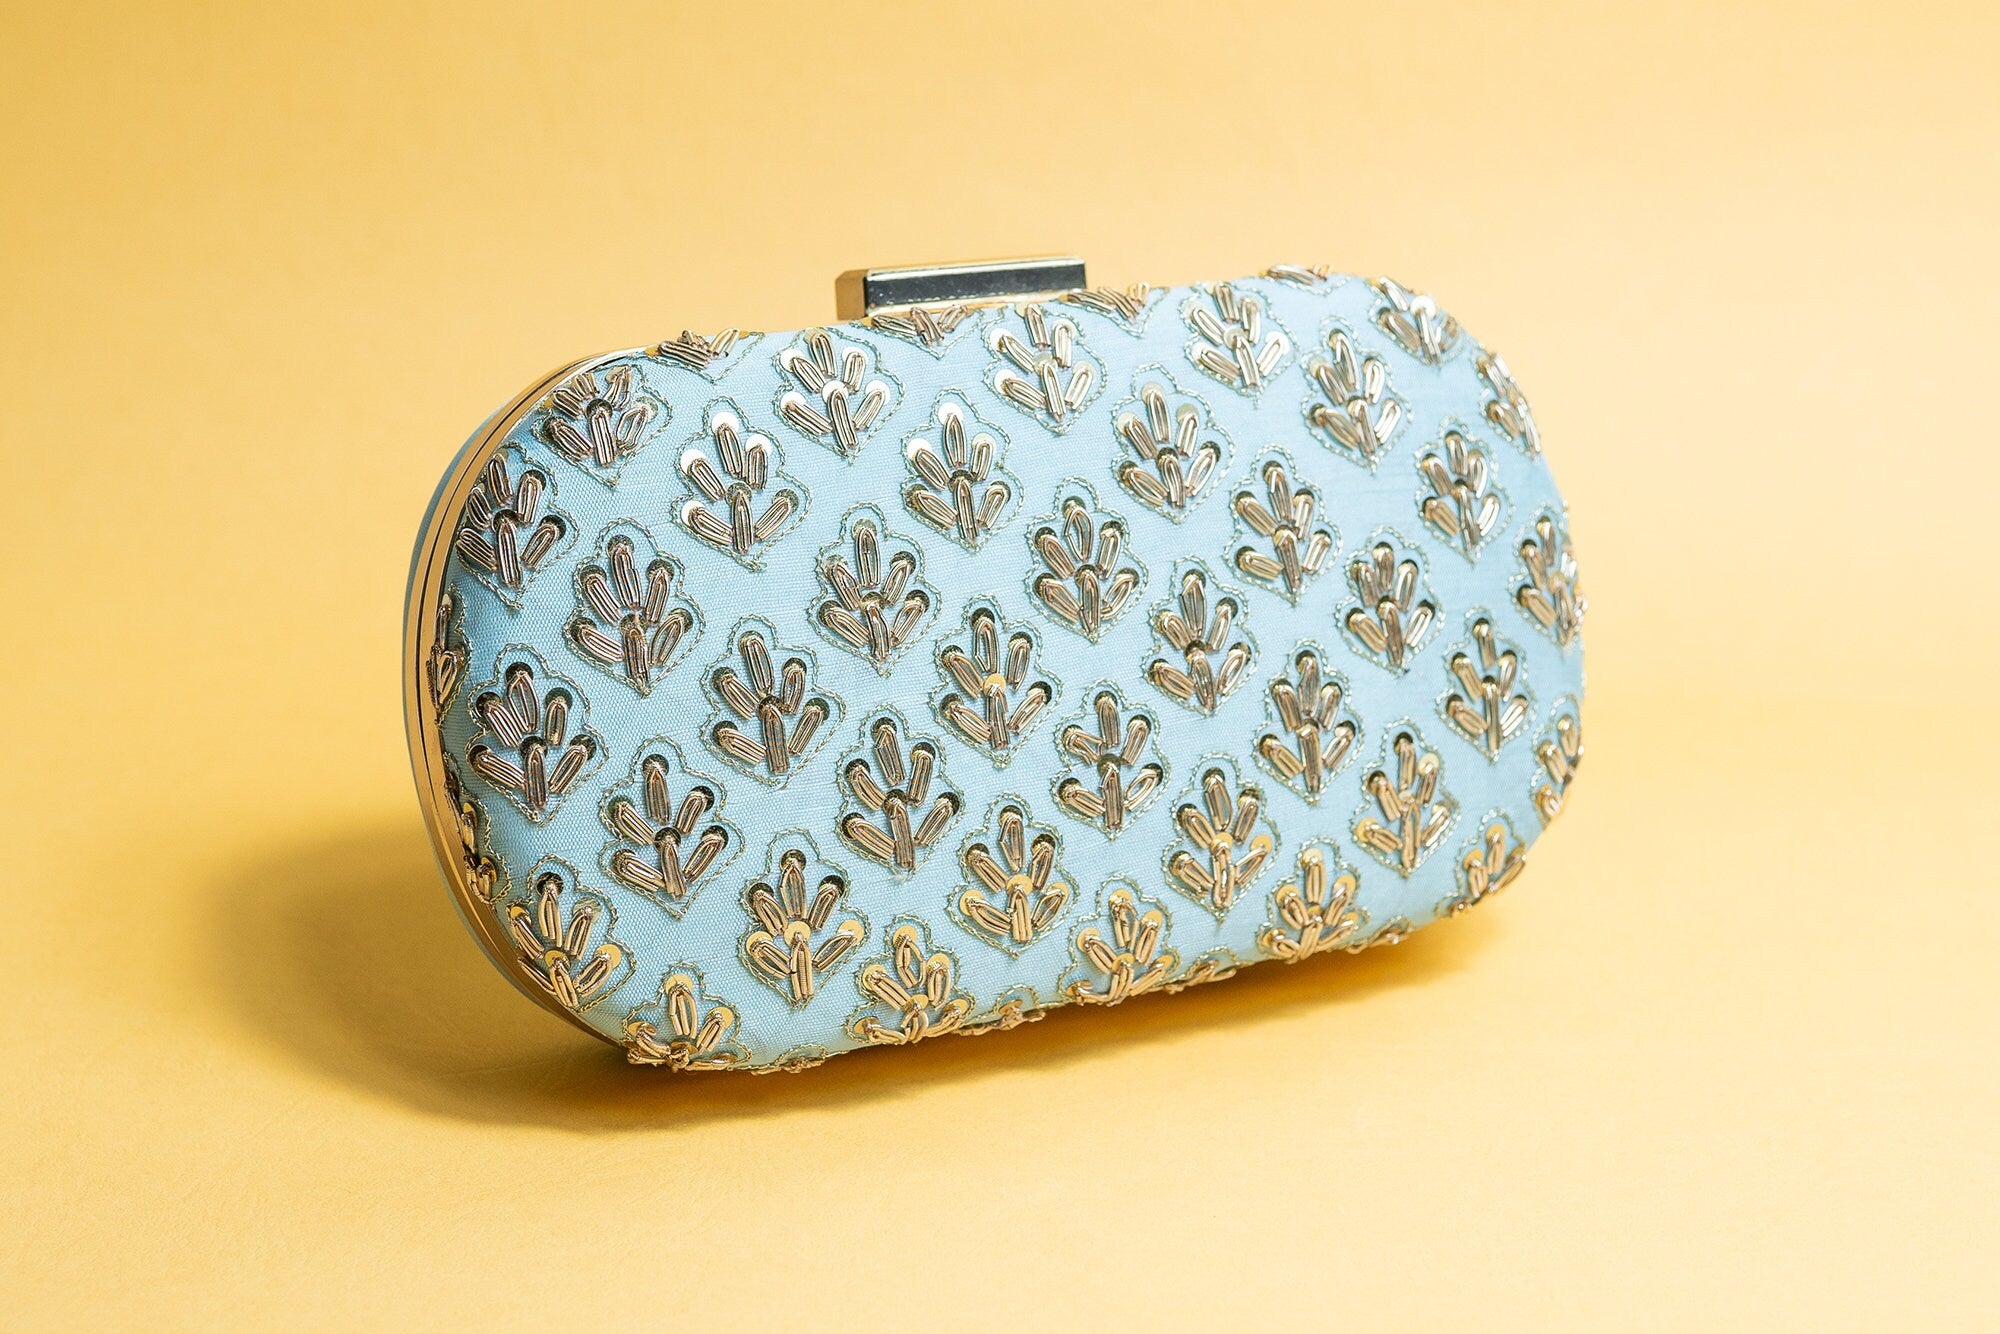 Powder blue metal embroidery clutch bag with detachable sling